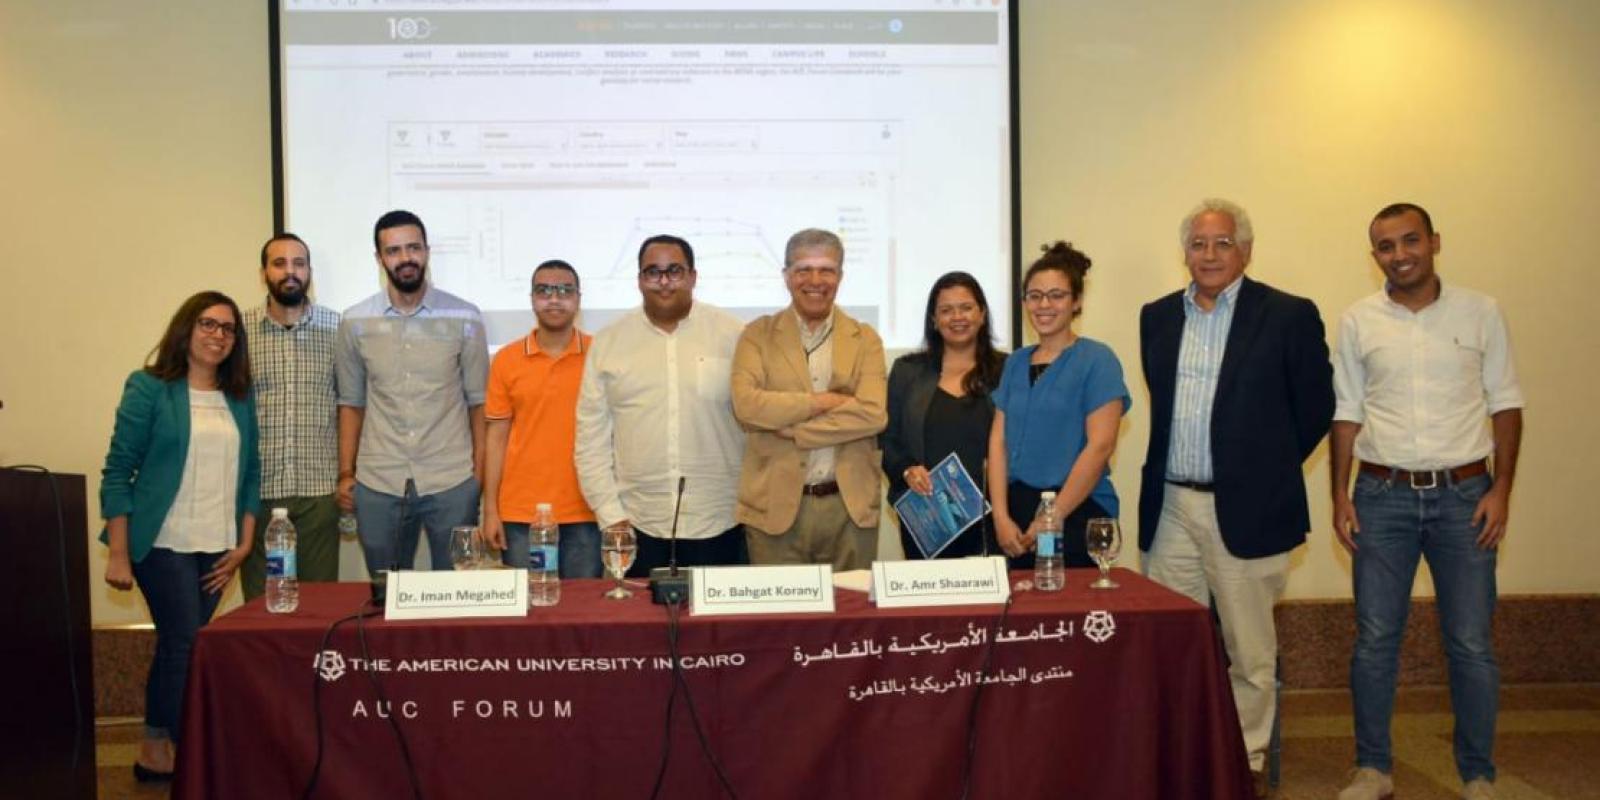 AUC Forum MENA Data Bank First to Centralize, Organize Data on Middle East